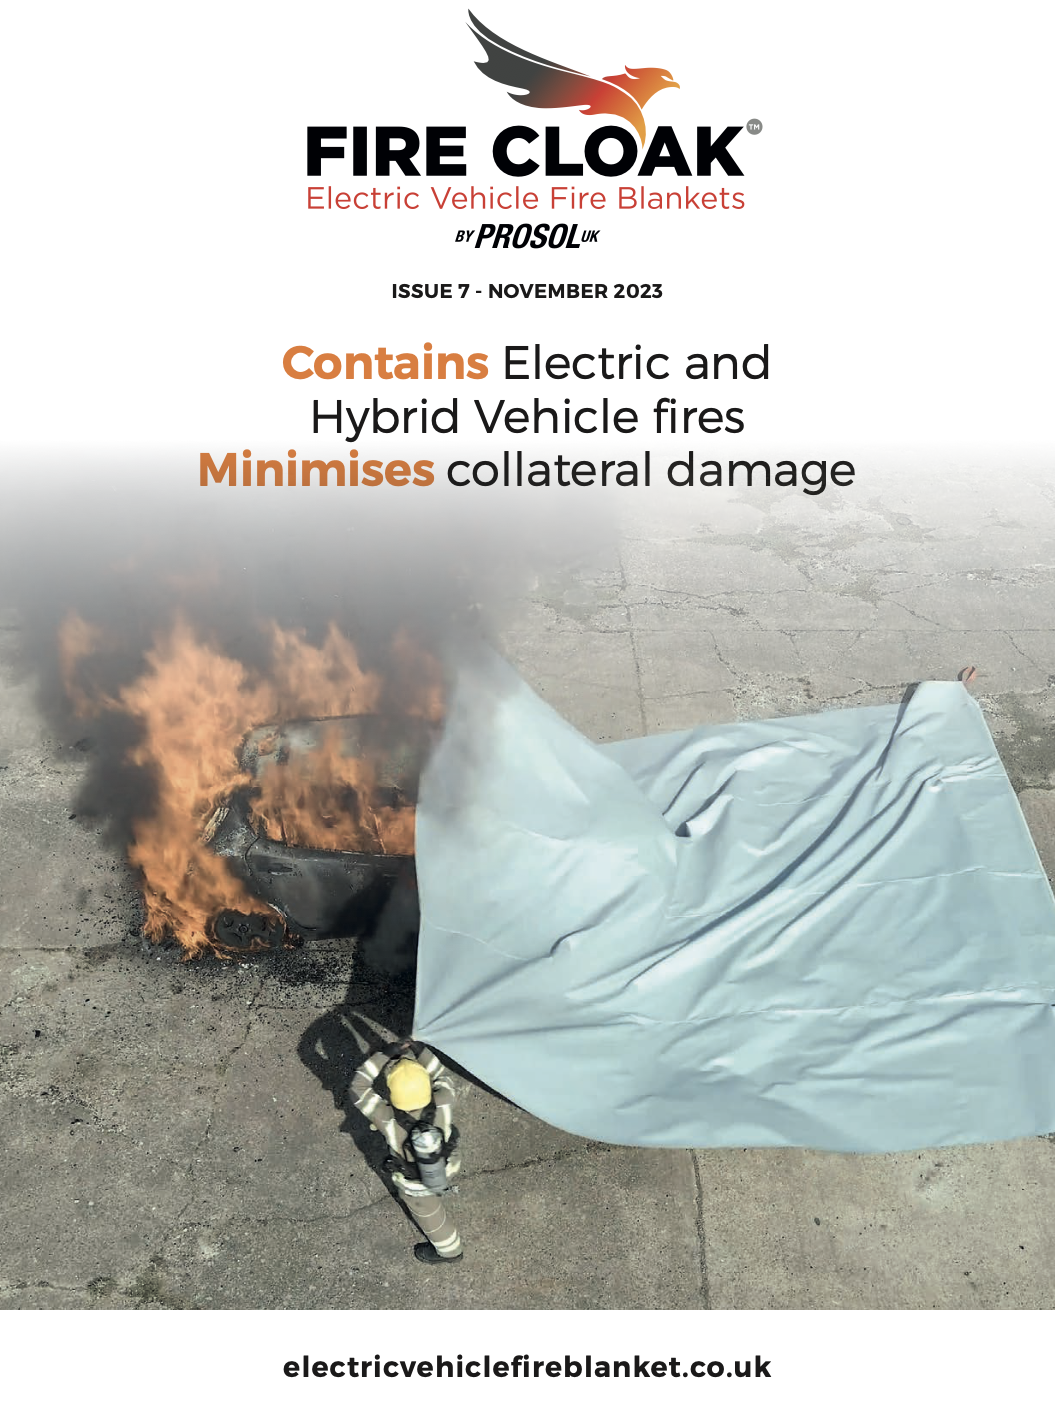 New Fire Cloak brochure available to download!